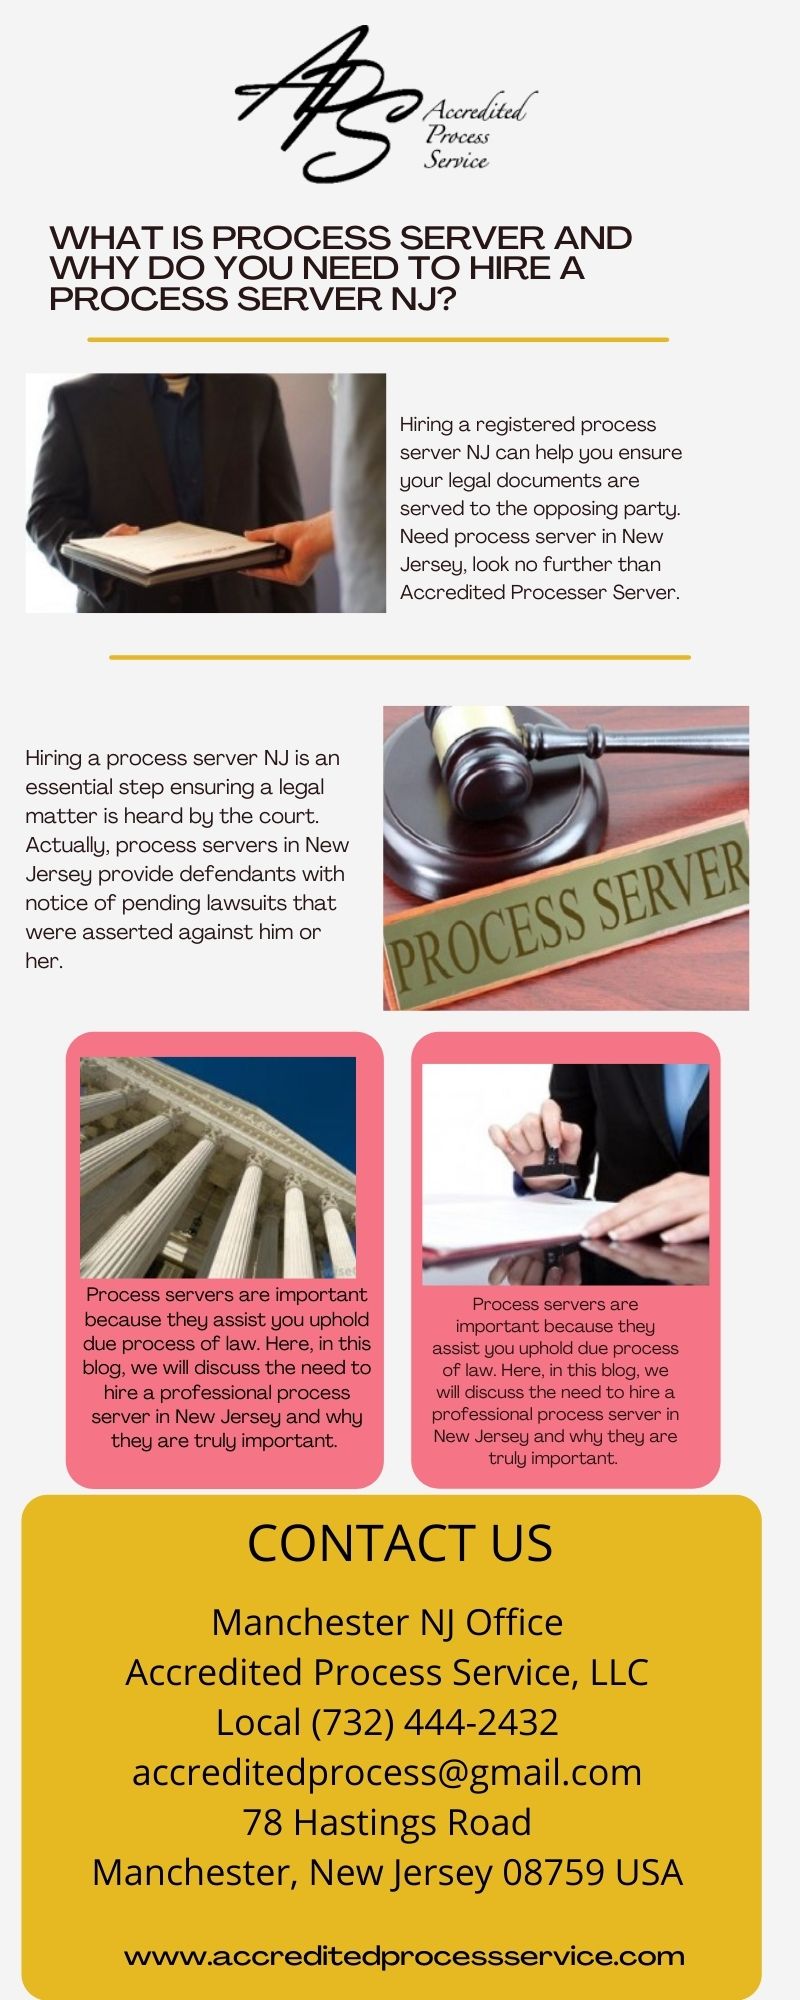 What Is Process Server And Why Do You Need To Hire A Process Server NJ.jpg  by Accreditedprocess